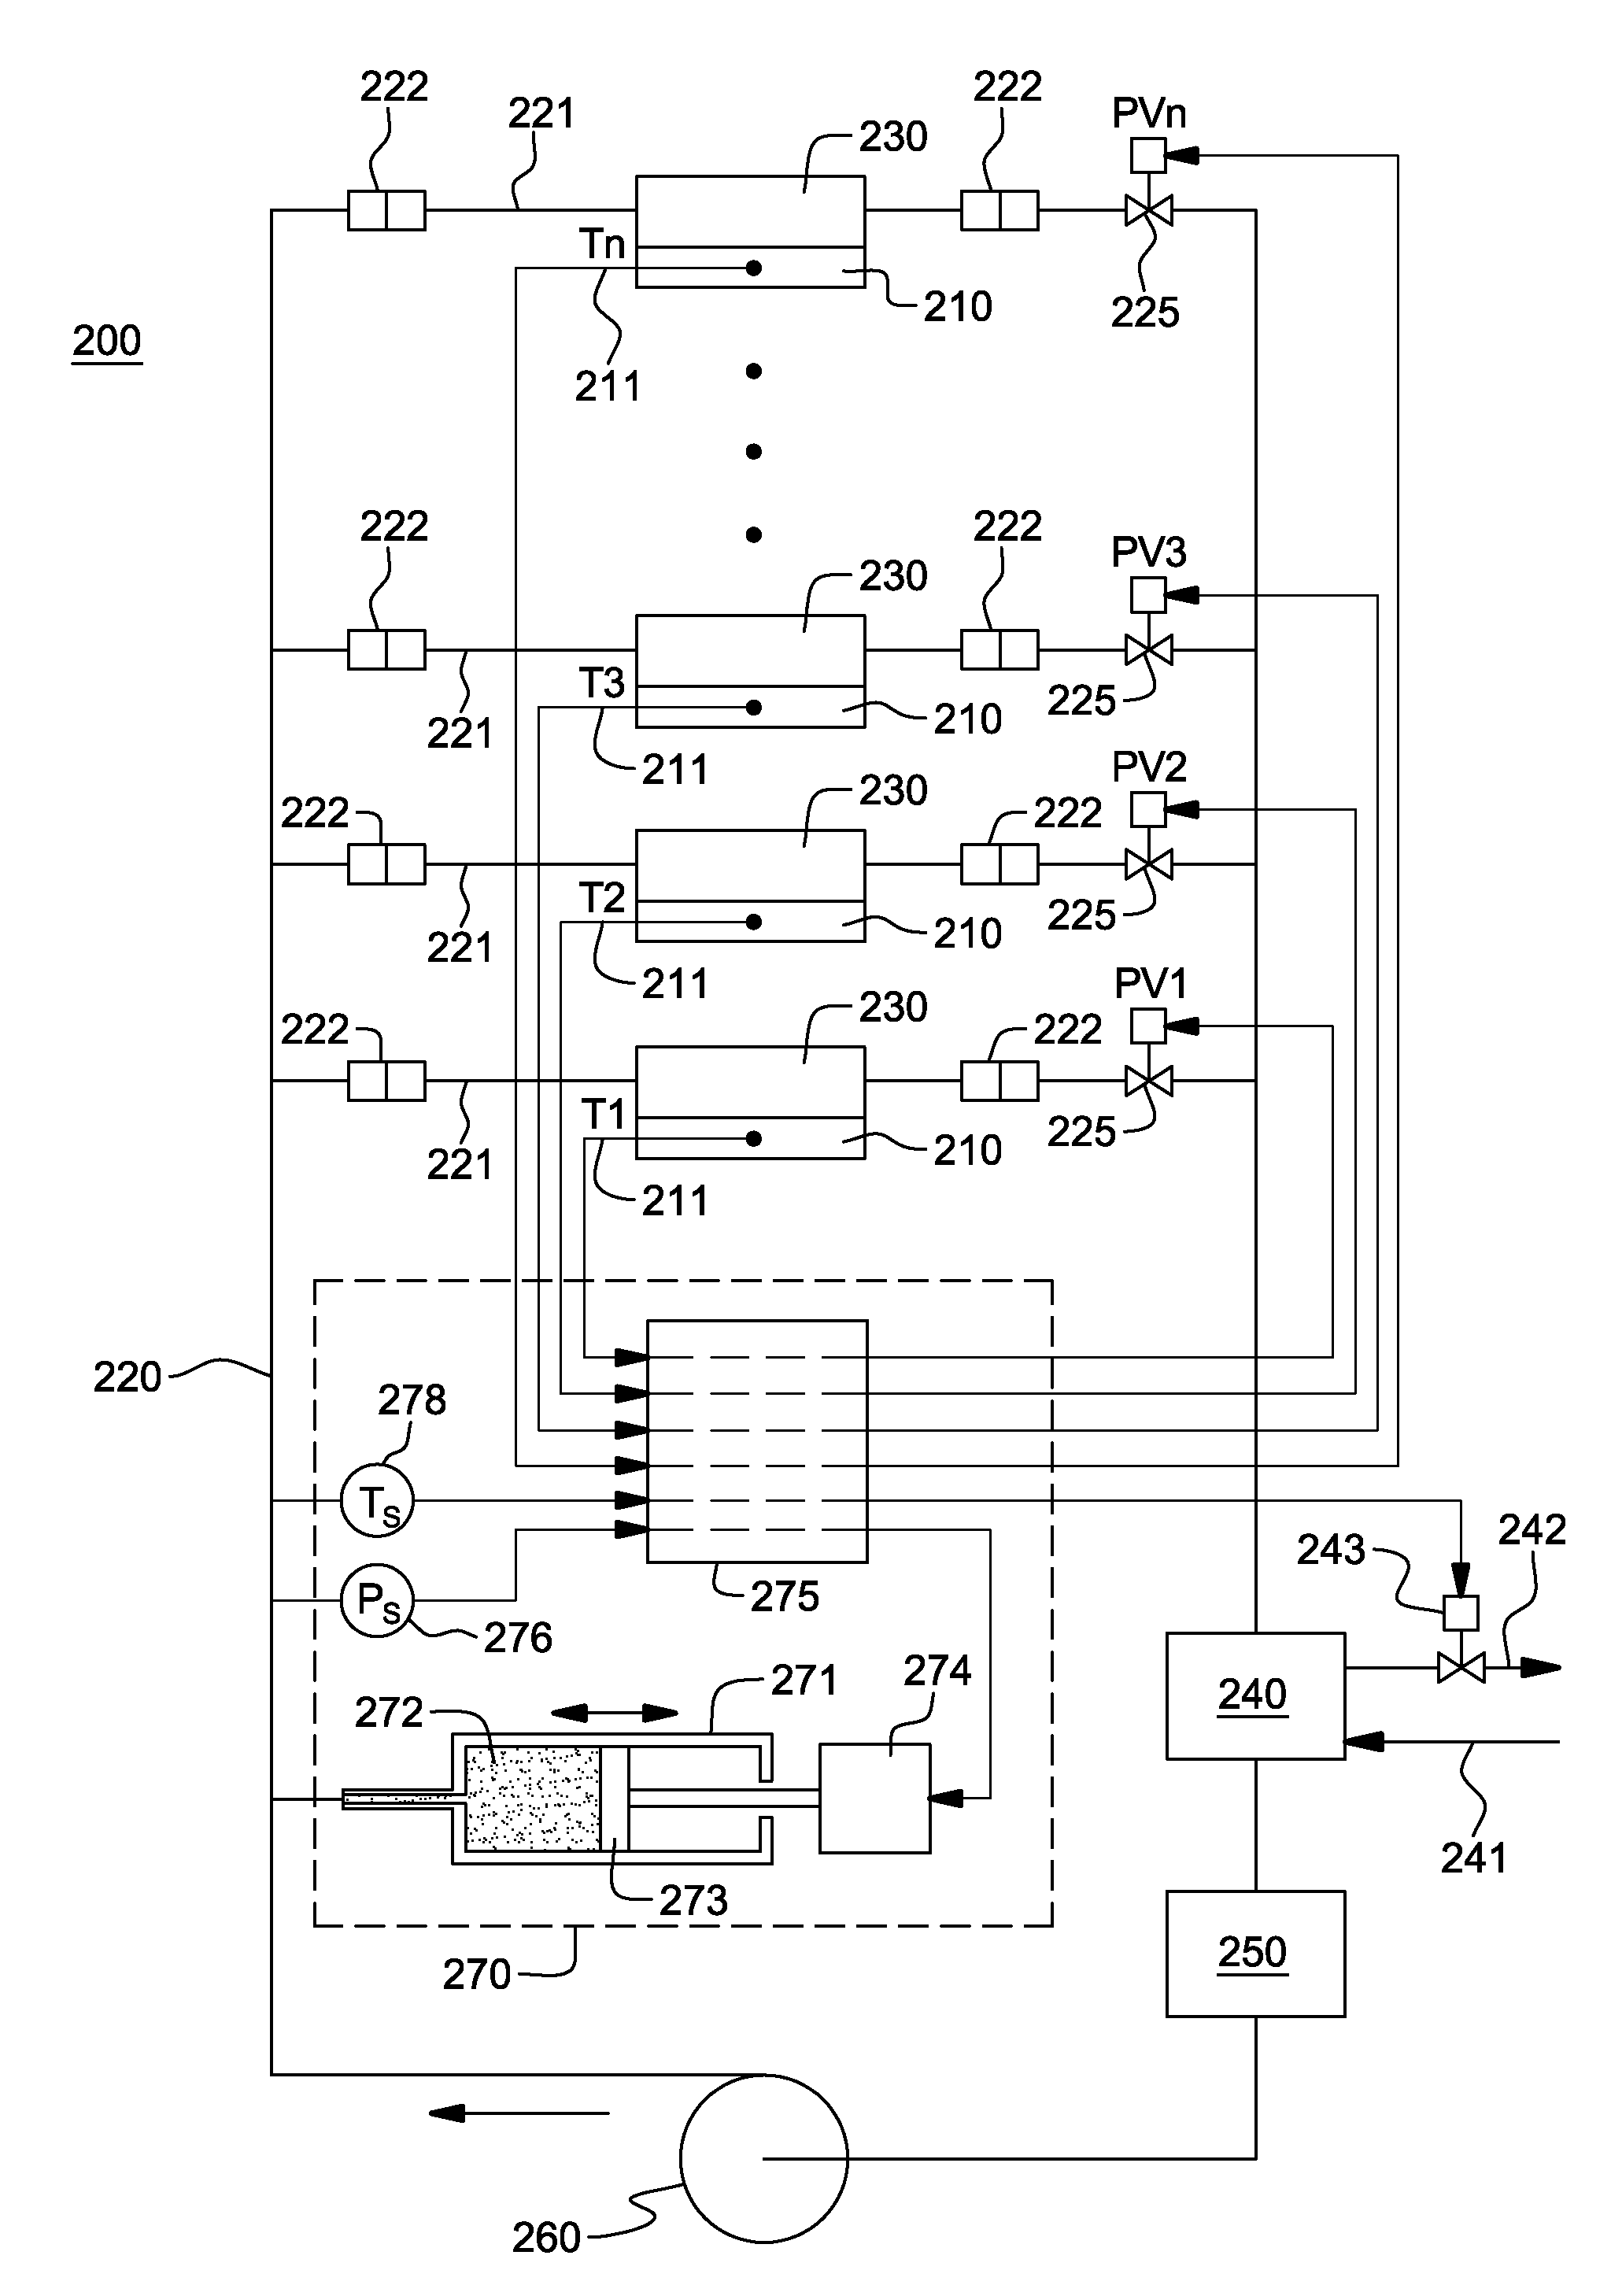 Control of system coolant to facilitate two-phase heat transfer in a multi-evaporator cooling system